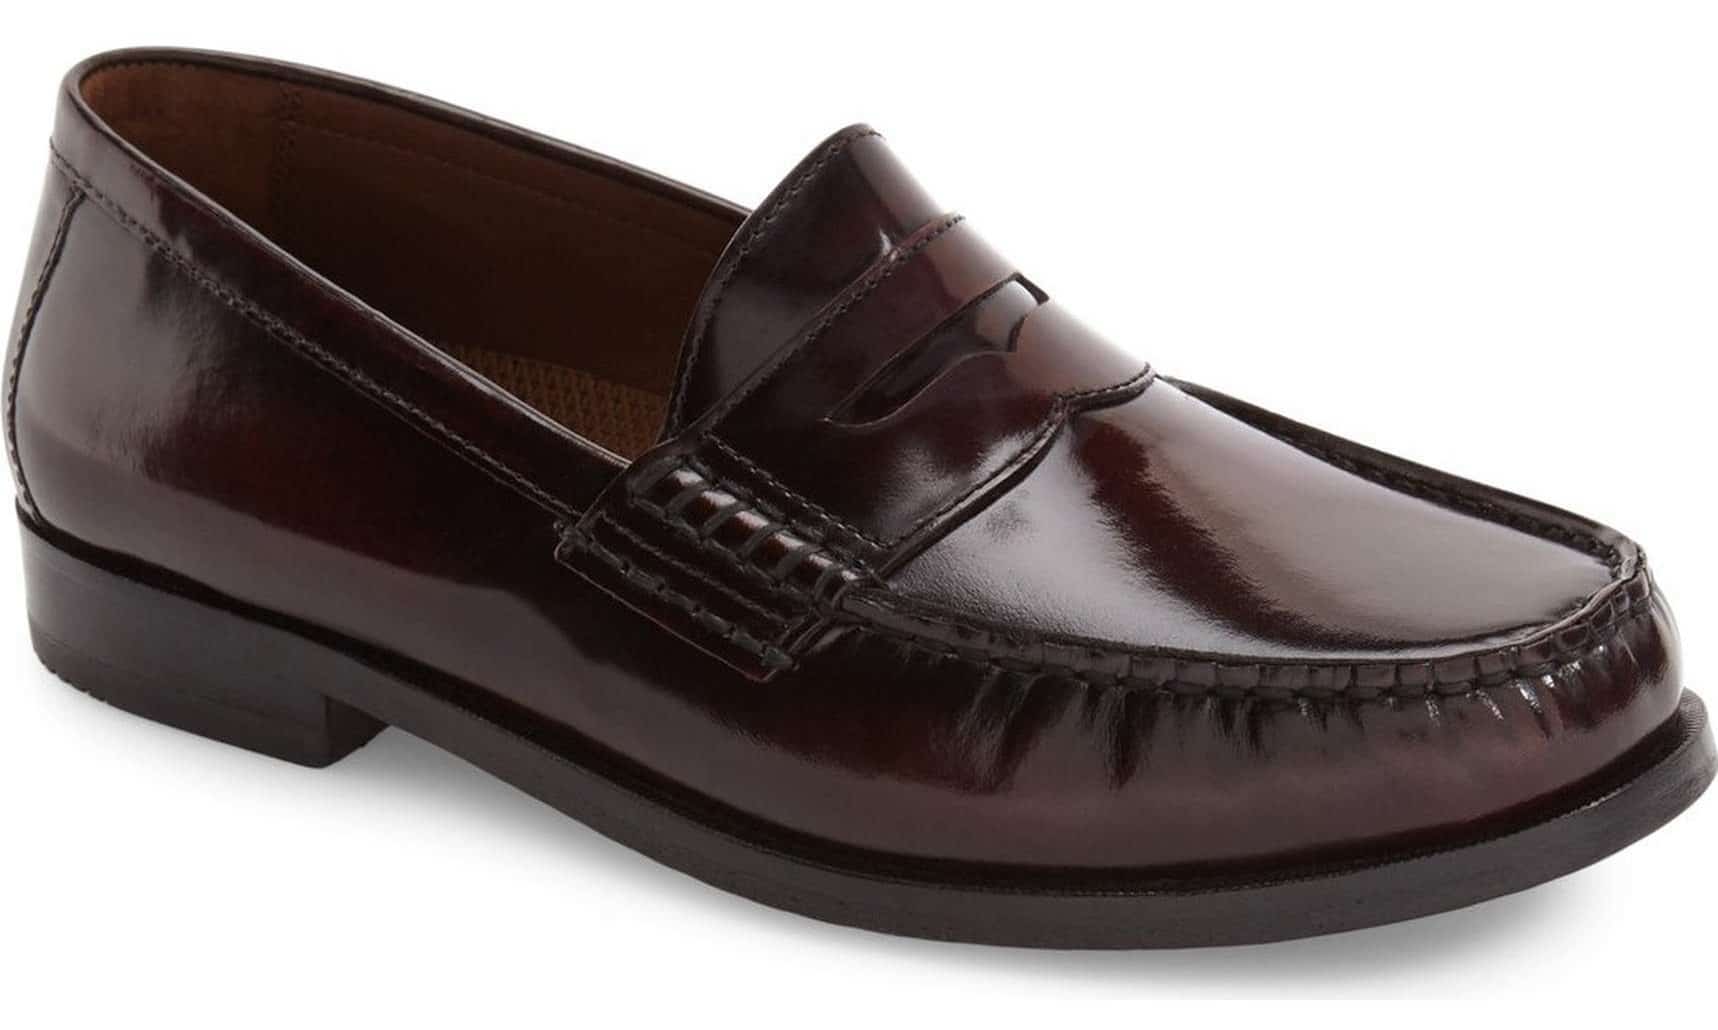 Best Loafers For Men 2017: Classic Penny Loafer in Burgundy Leather 2018